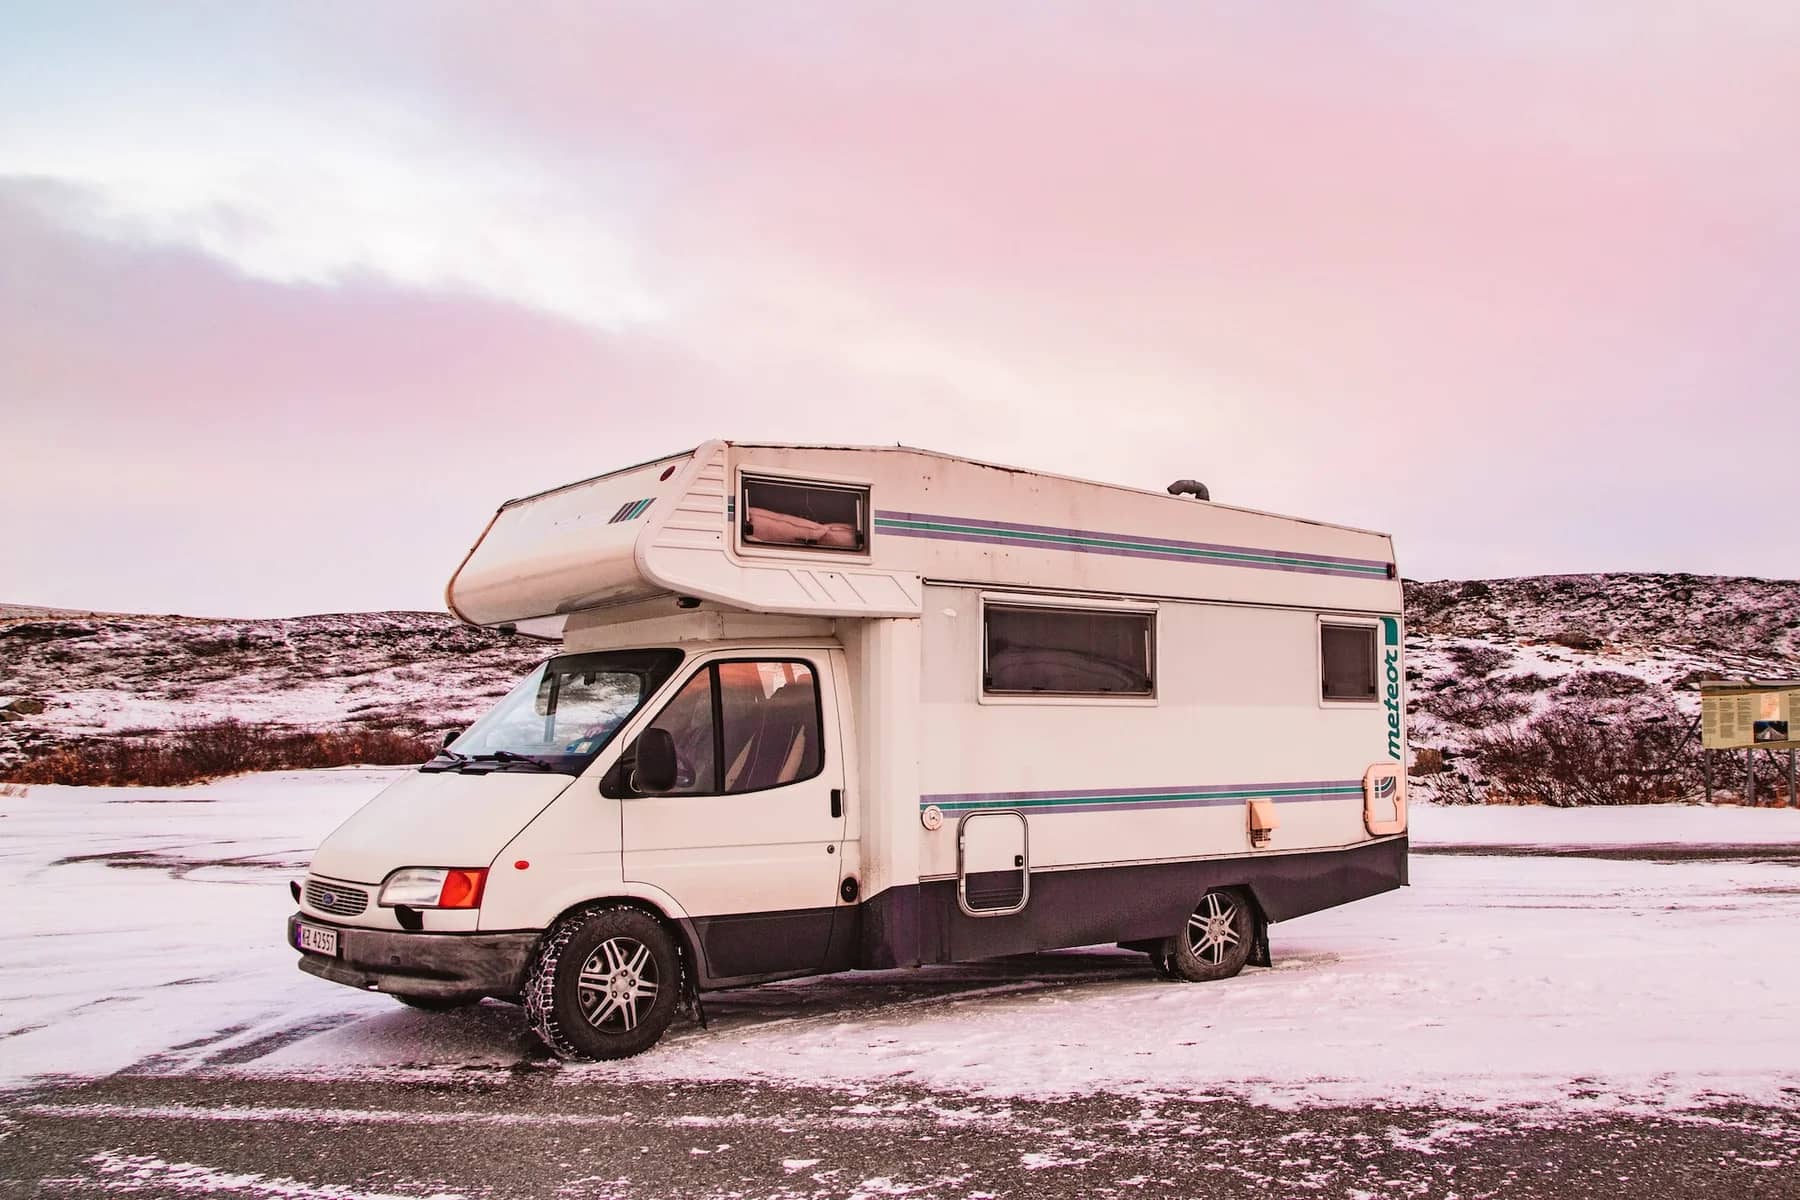 Image of a parked RV in snow to convey storing your RV trees